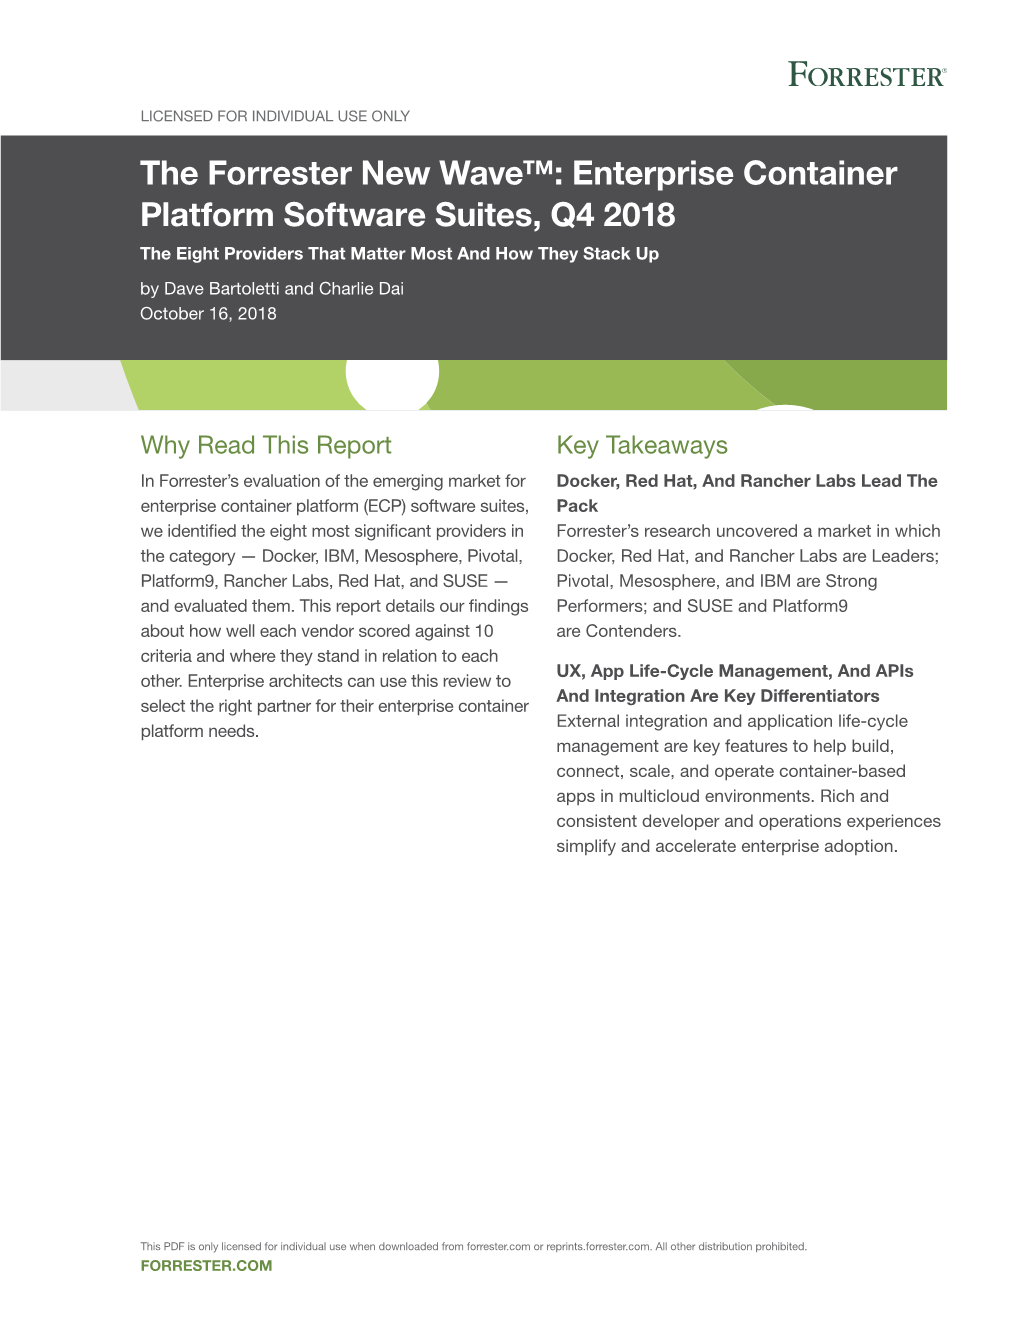 Enterprise Container Platform Software Suites, Q4 2018 the Eight Providers That Matter Most and How They Stack up by Dave Bartoletti and Charlie Dai October 16, 2018